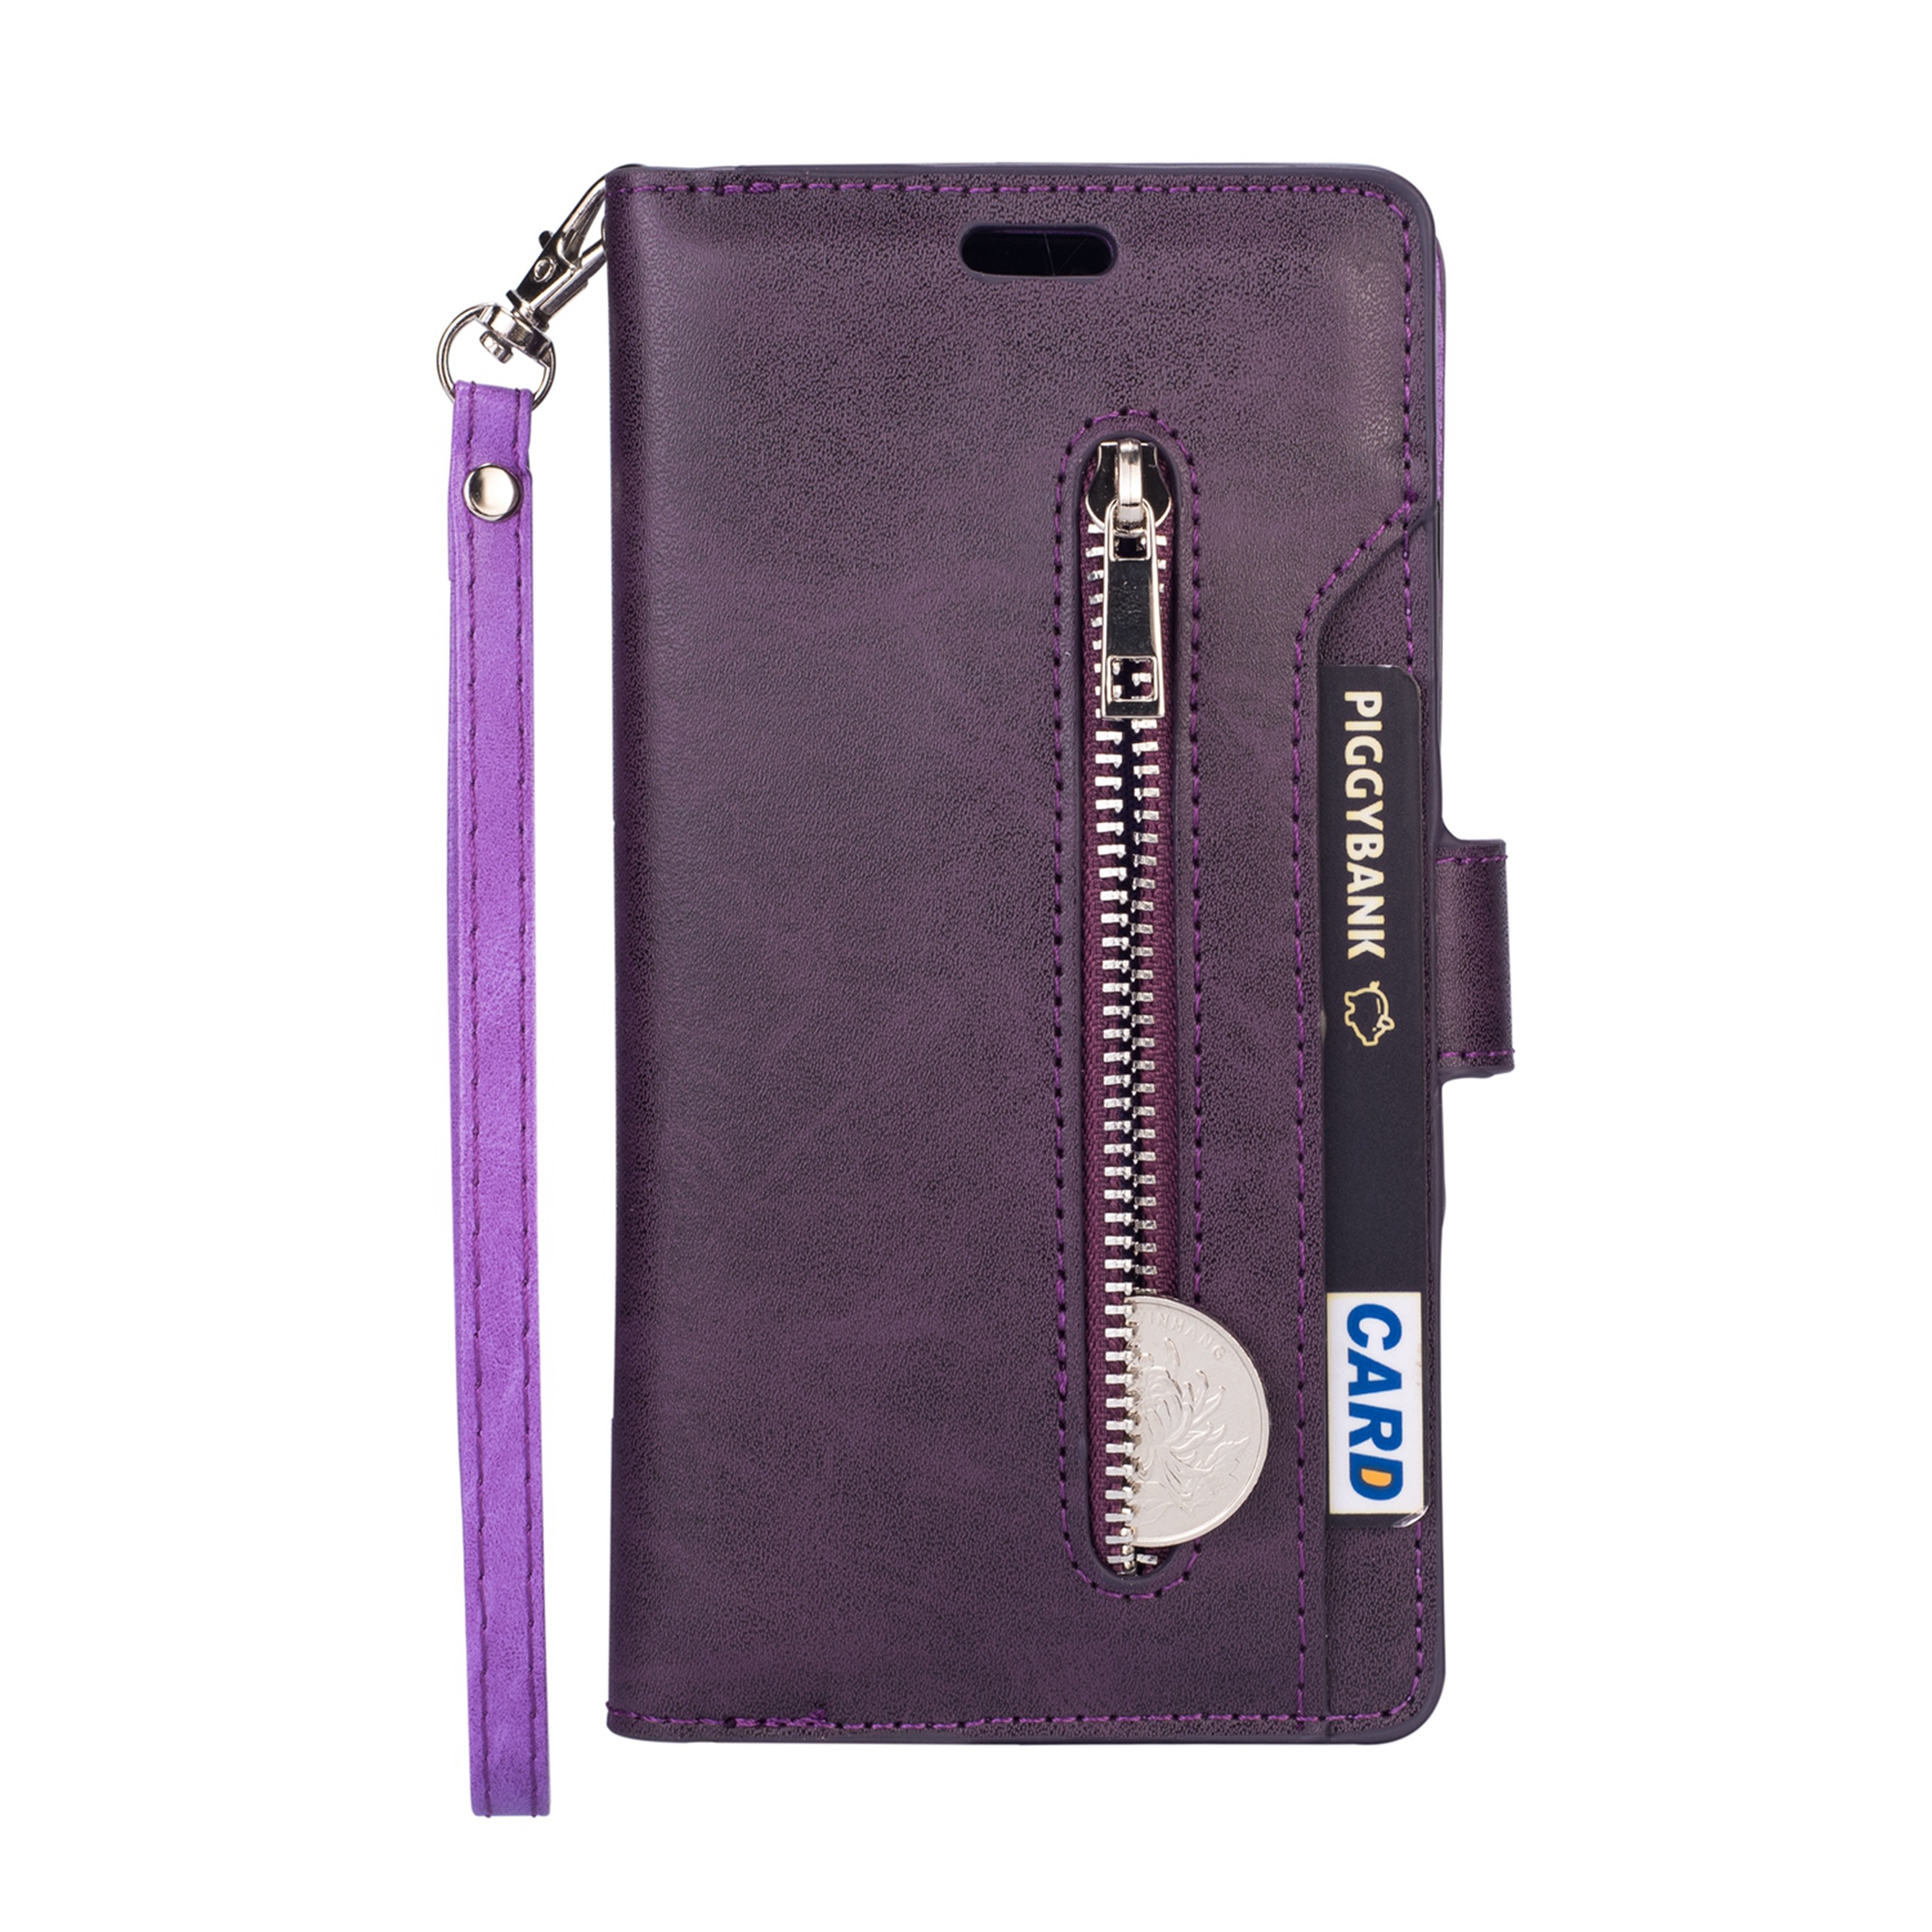 iPhone 11 Pro Max 6.5 inch Wallet Case, Dteck 9 Card Slots Premium Leather Zipper Purse case Flip Kickstand Folio Magnetic with Wrist Strap Credit Cash Cover For Apple iPhone 11 Pro Max, Purple - image 2 of 7